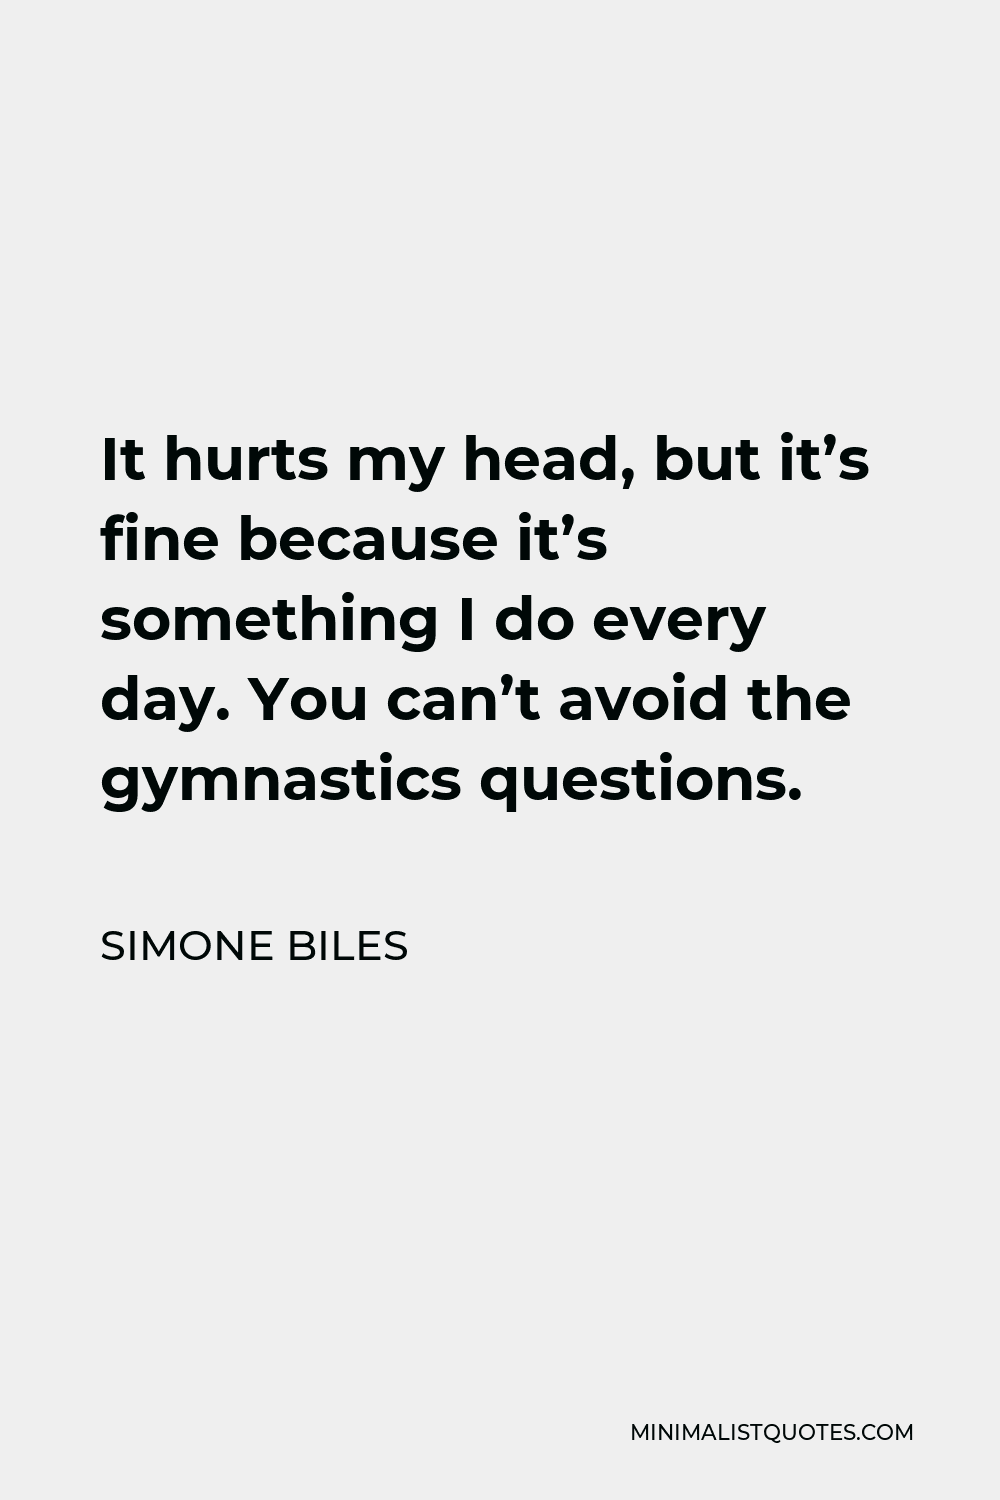 Simone Biles Quote - It hurts my head, but it’s fine because it’s something I do every day. You can’t avoid the gymnastics questions.